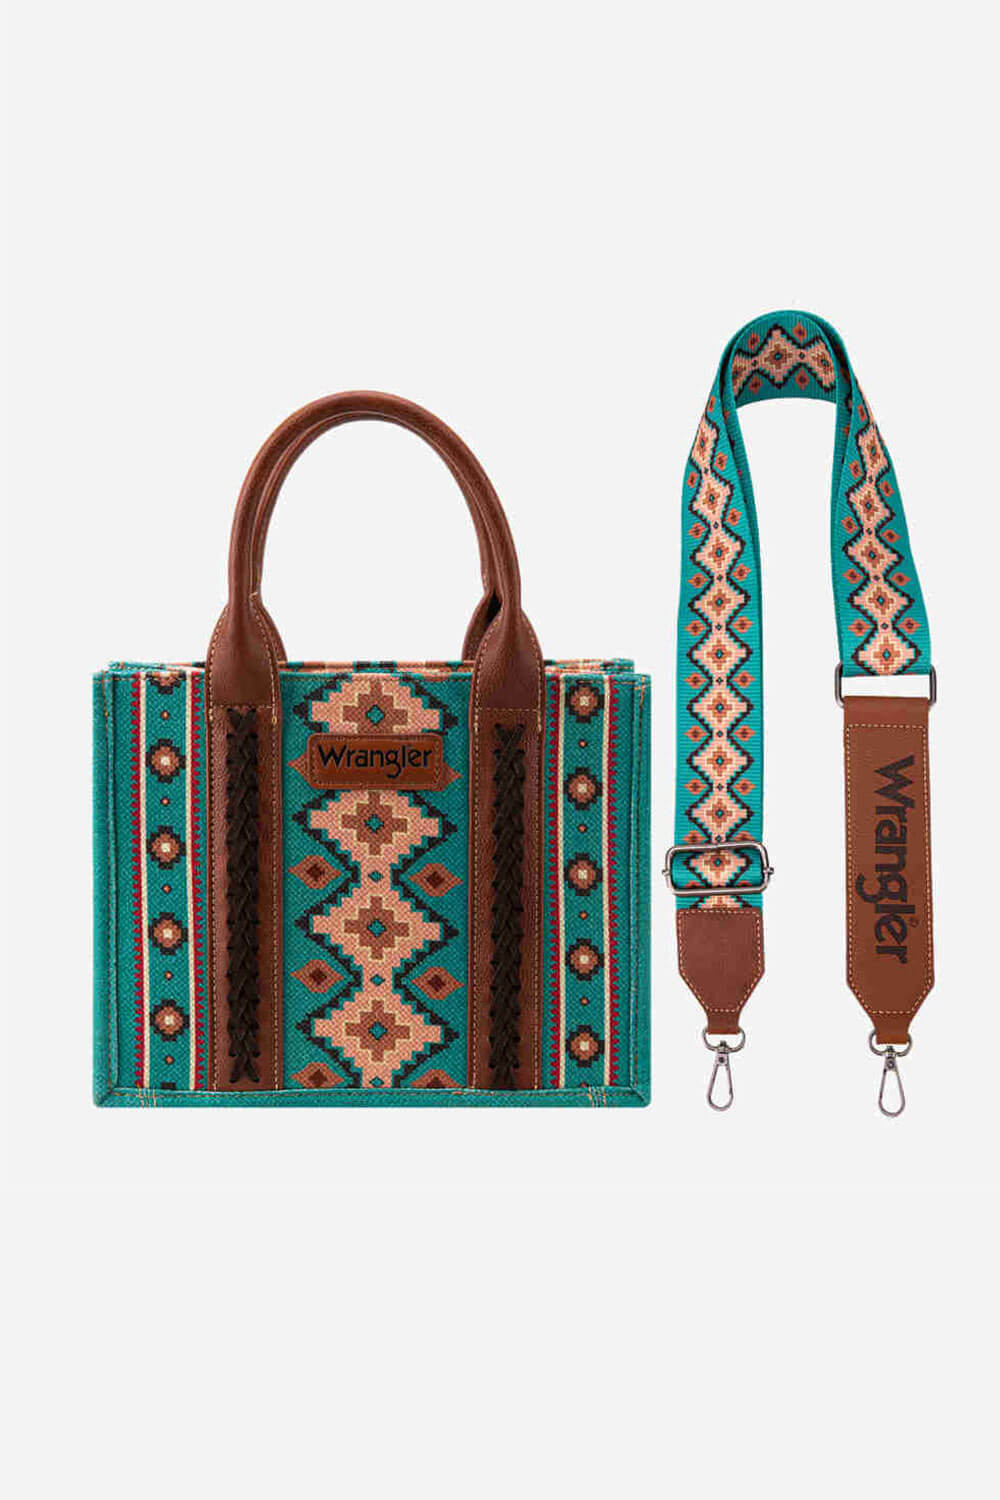 Wrangler Serape Canvas Tote- Turquoise – Branded Country Wear